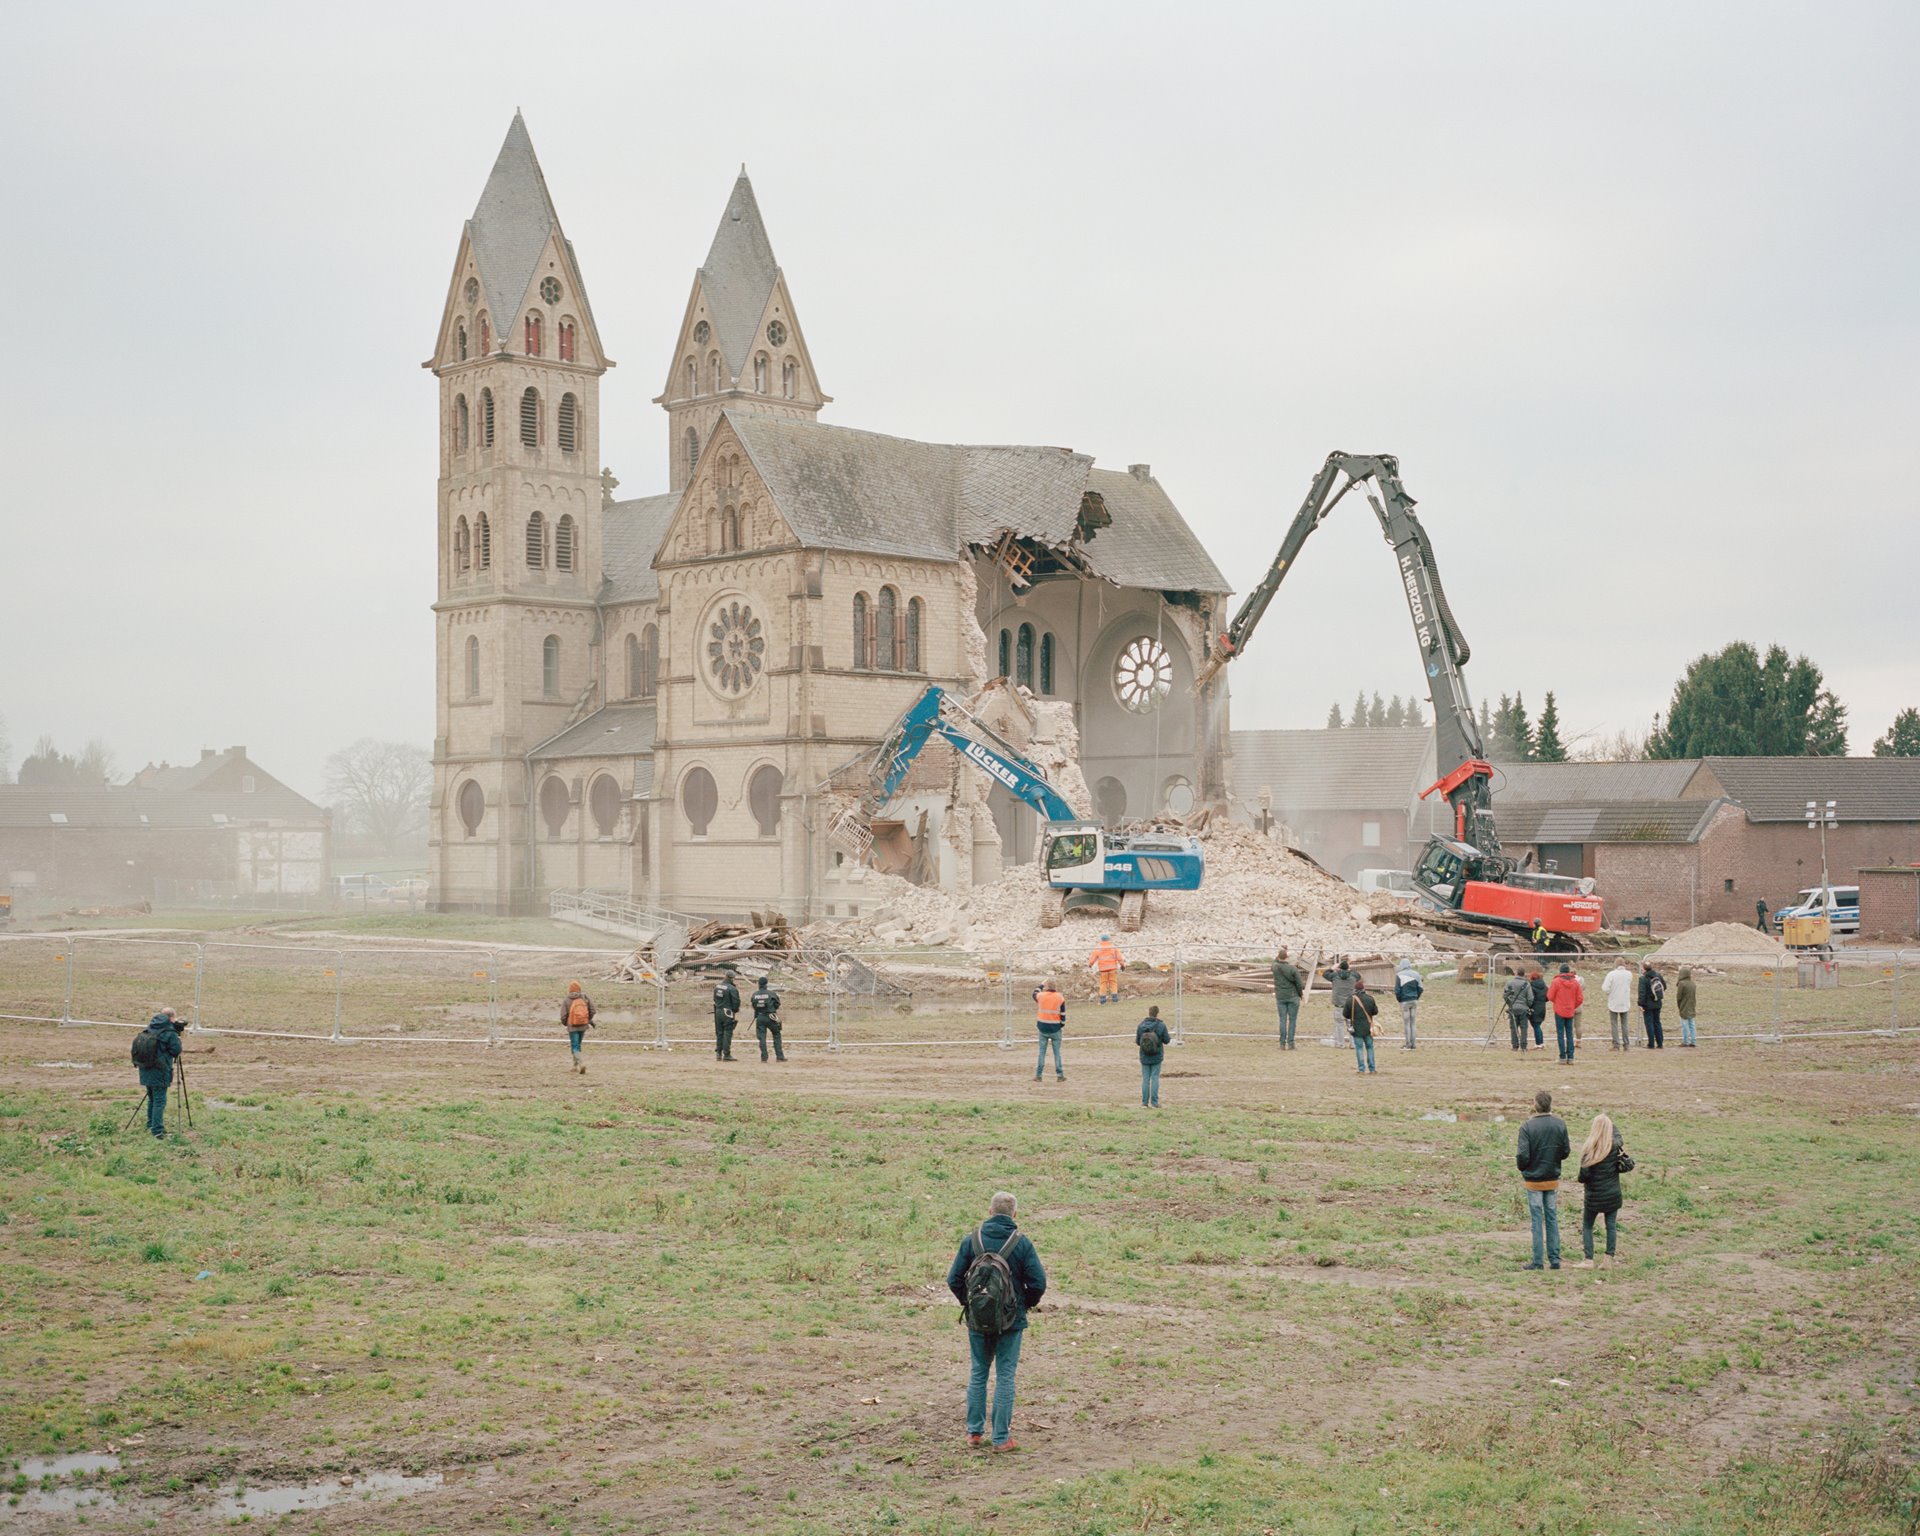 Energy company RWE demolishes the Immerath parish church, as the village is destroyed to make way for expansion of the Garzweiler open-pit mine. Known as the &quot;Immerather Dom&rdquo; (Immerath Cathedral), the church was an important local landmark. RWE offered to reaccommodate residents in a new village 8 km away.